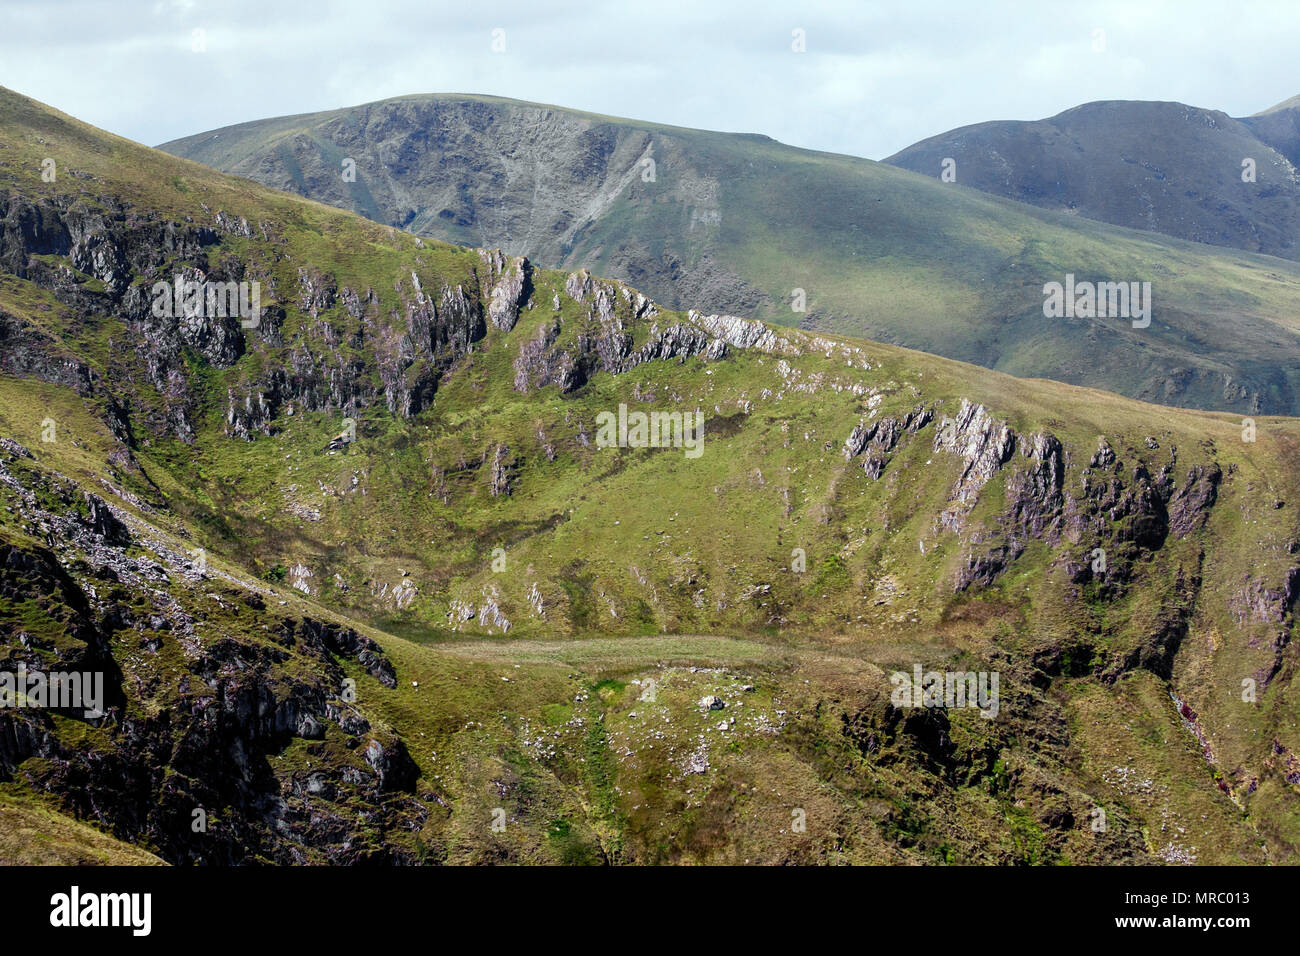 Cliffs seen on the ascent of the hike to Snowdon mountain, Snowdonia National Park, Wales. Stock Photo